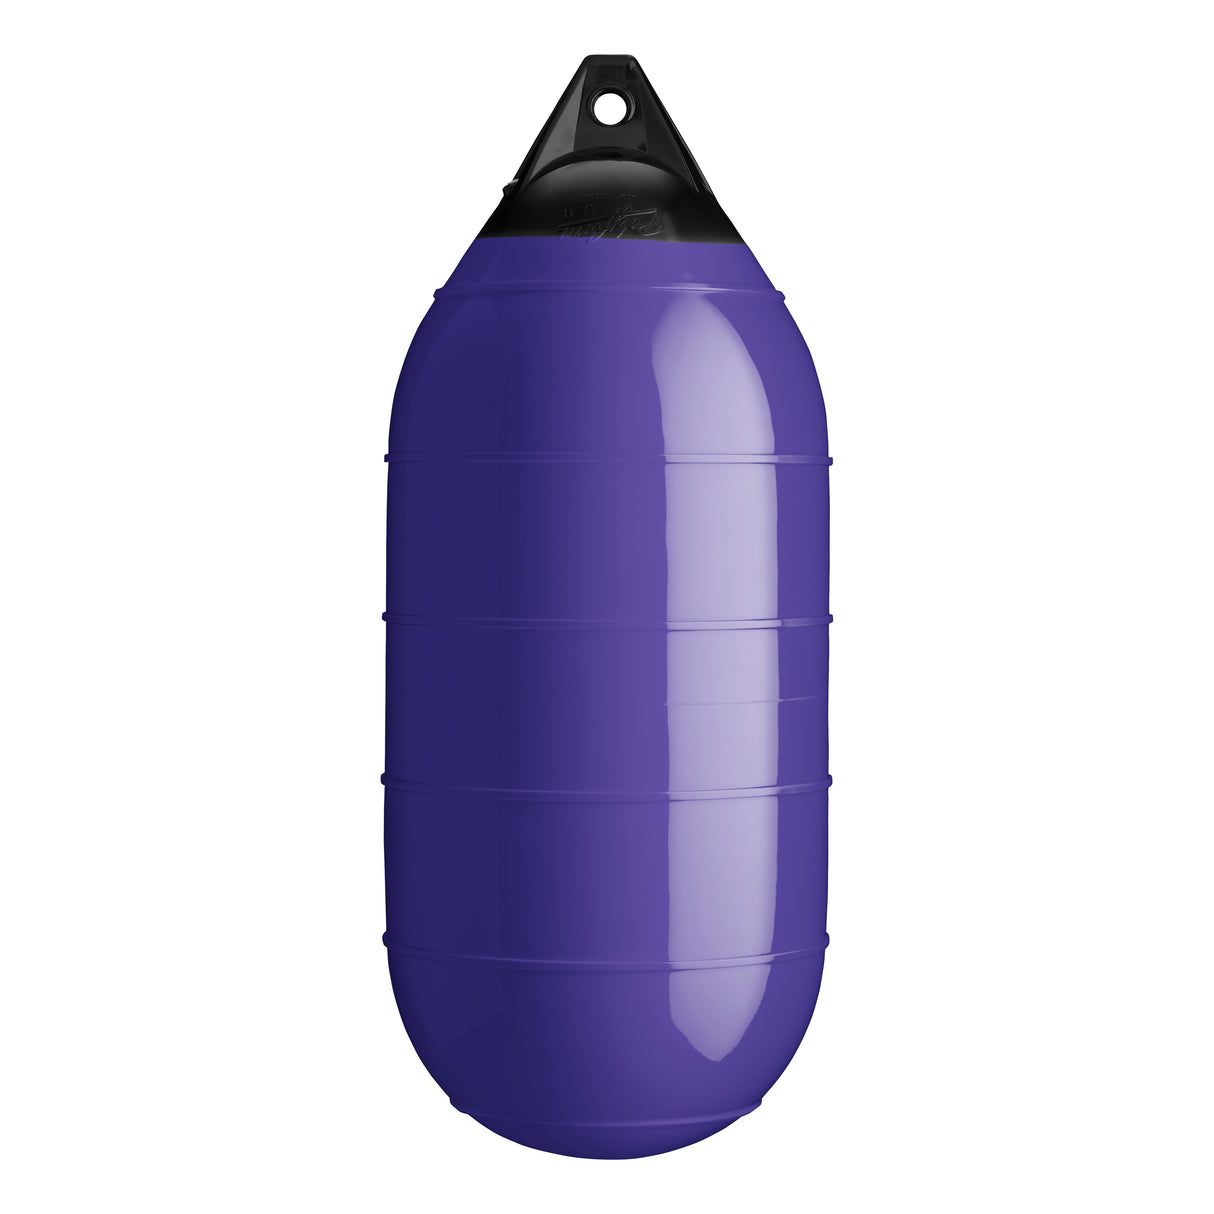 Purple low drag buoy with Black-Top, Polyform LD-4 